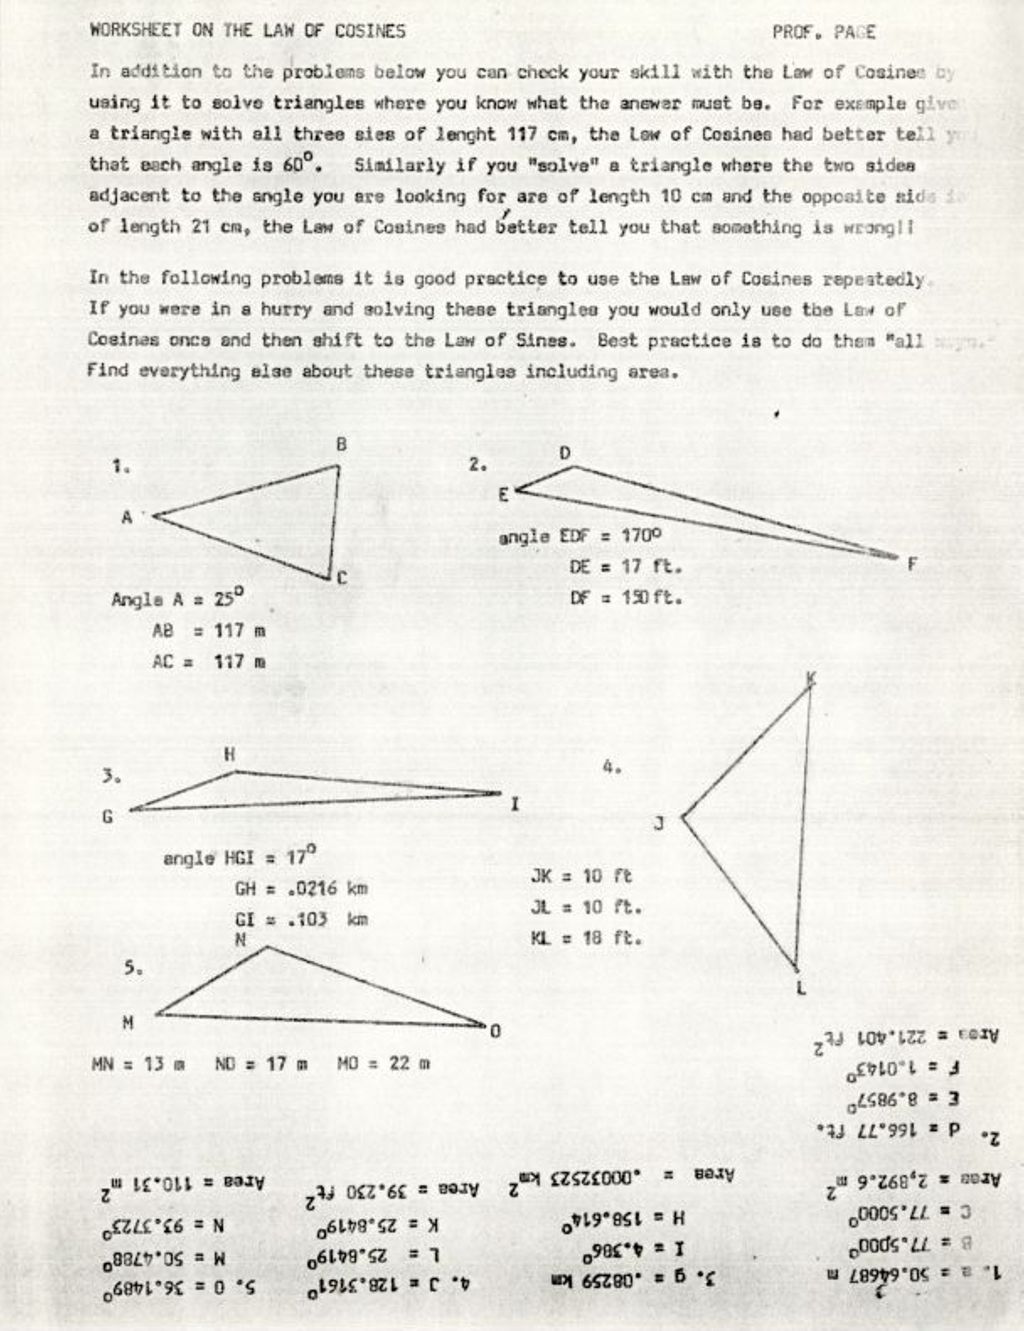 Miniature of Worksheet on the Law of Cosines w/ ak